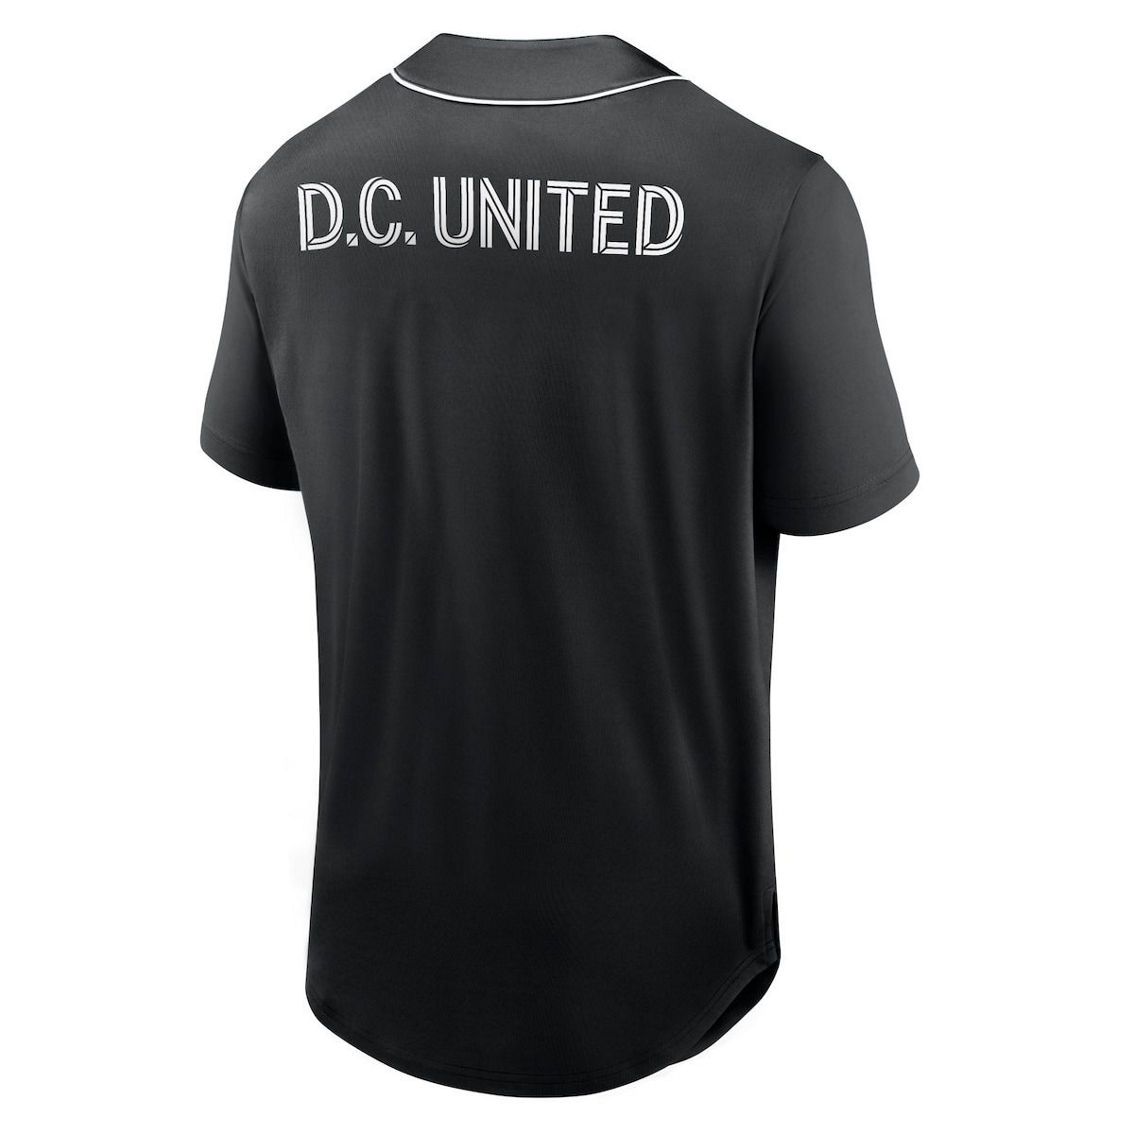 Fanatics Branded Men's Black D.C. United Third Period Fashion Baseball Button-Up Jersey - Image 4 of 4